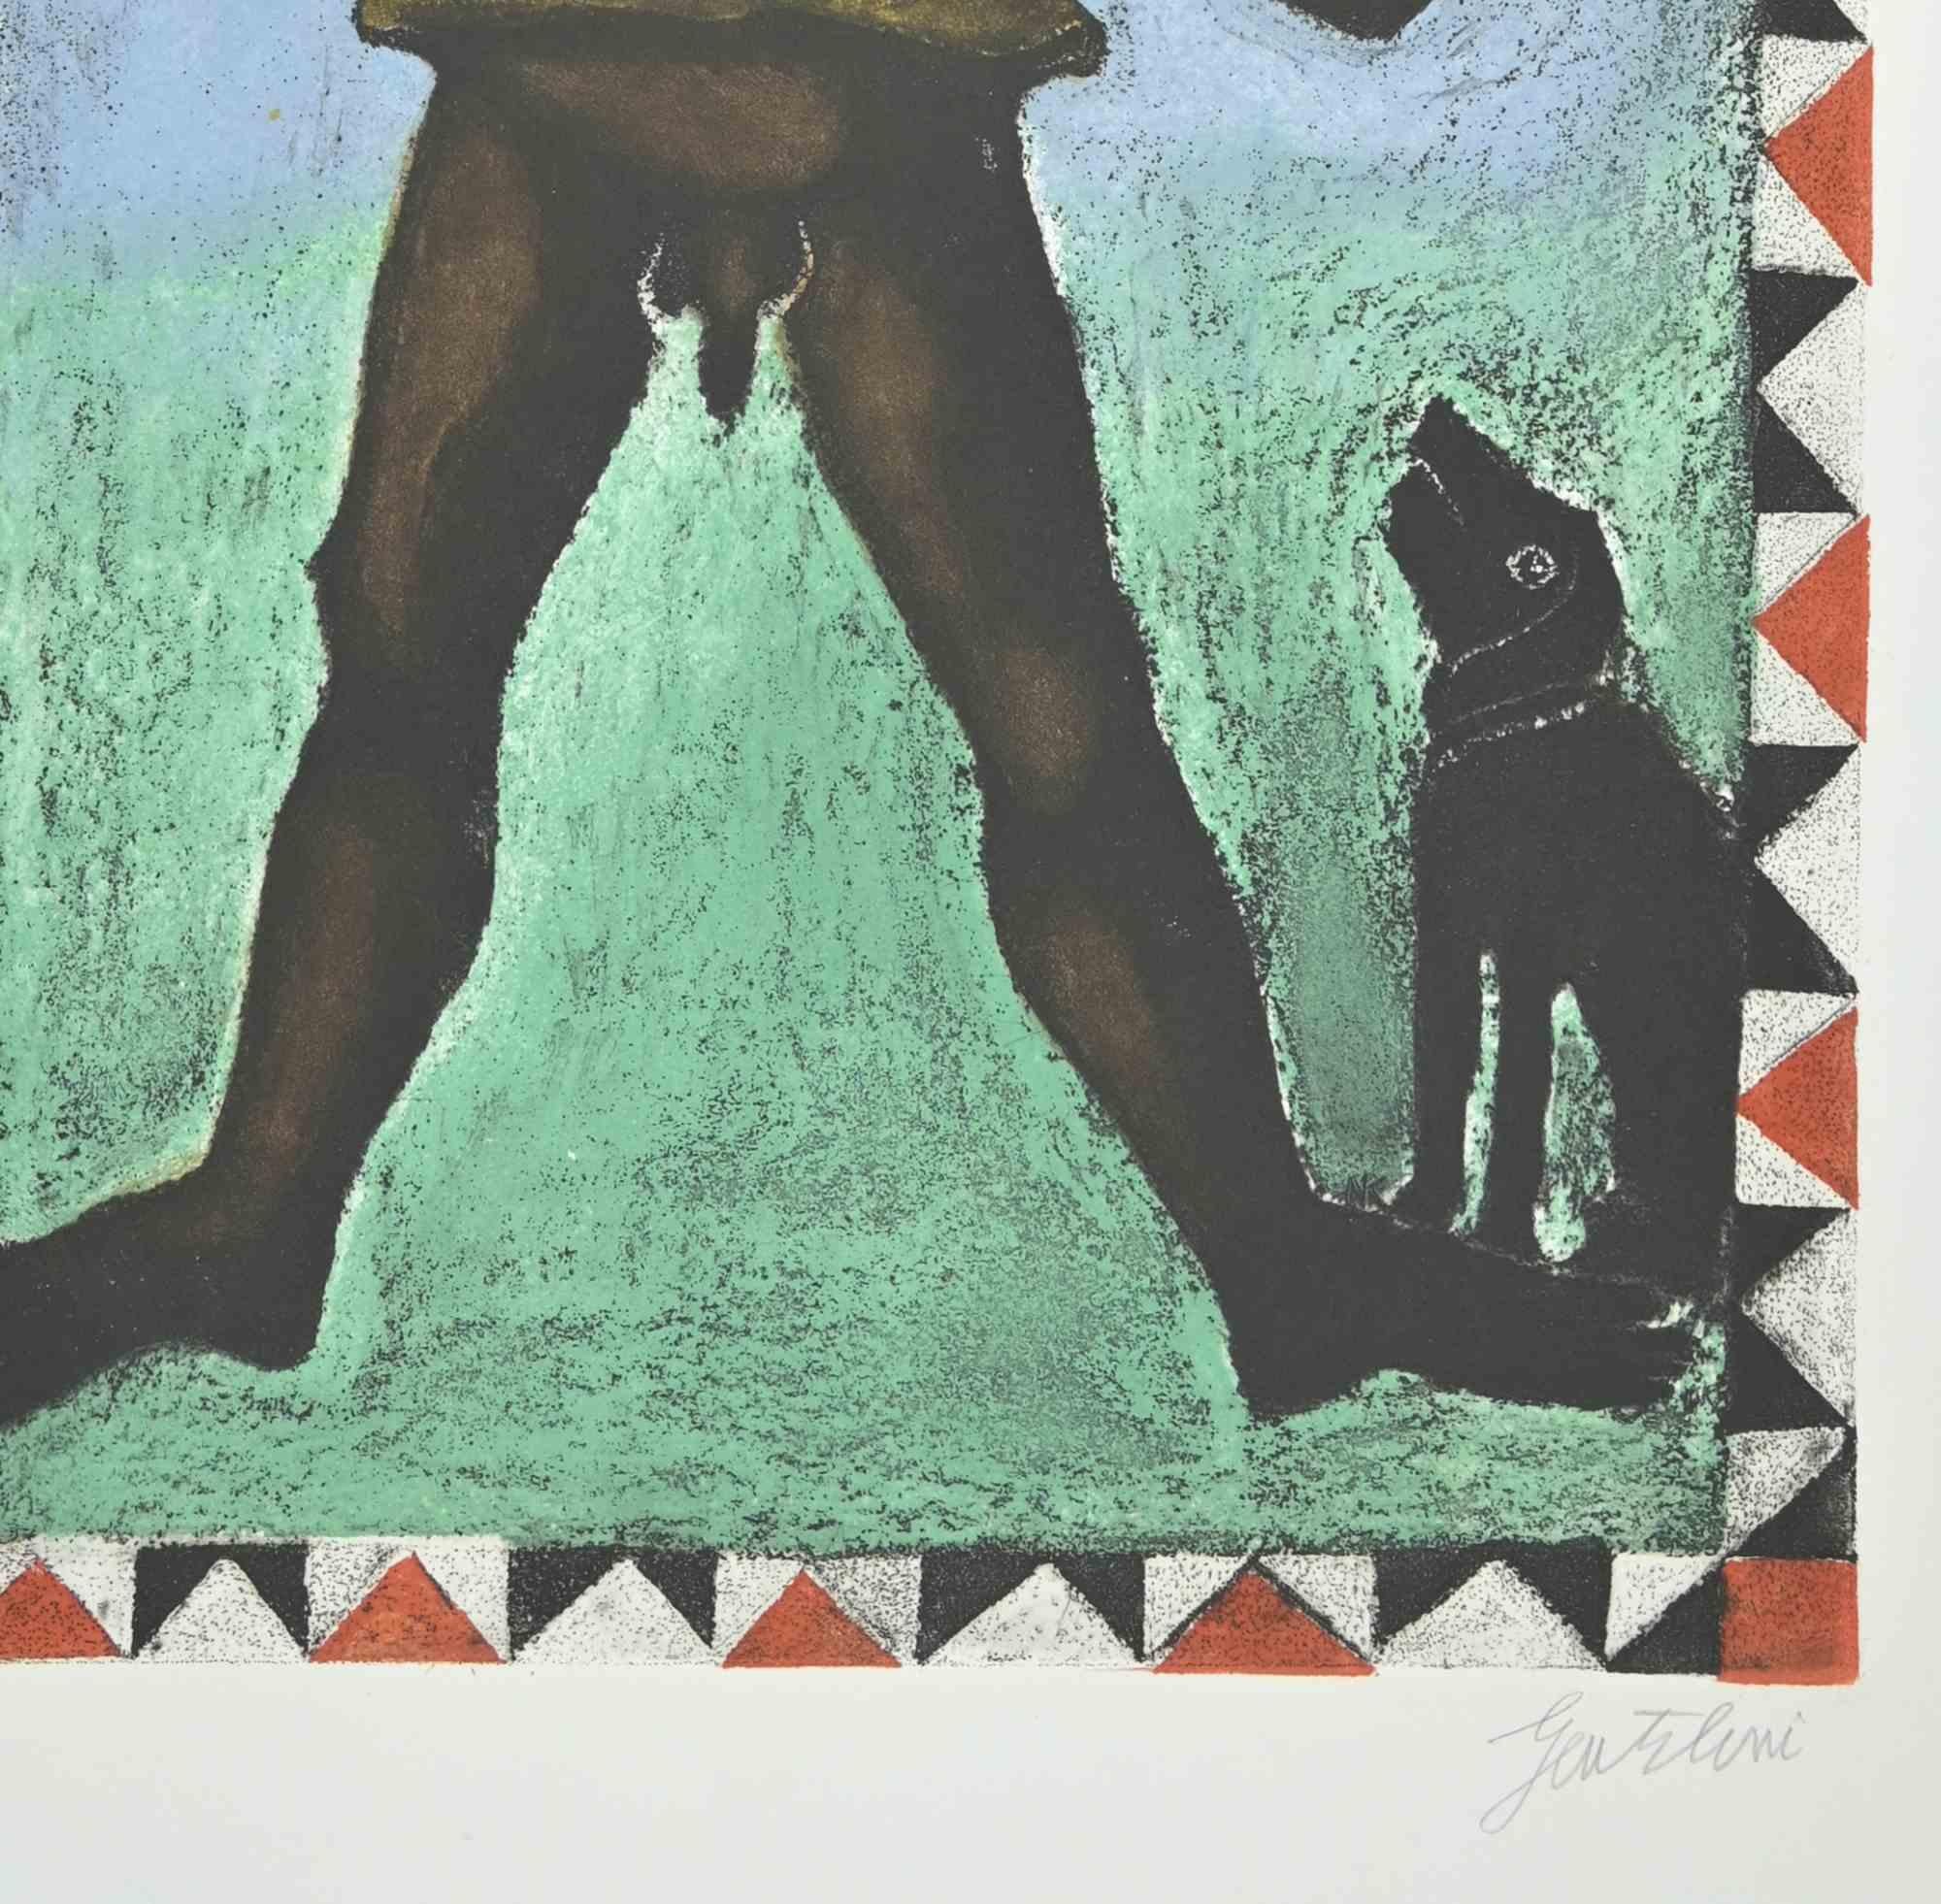  The Crazy - Etching and Aquatint by Franco Gentilini - 1970s For Sale 1